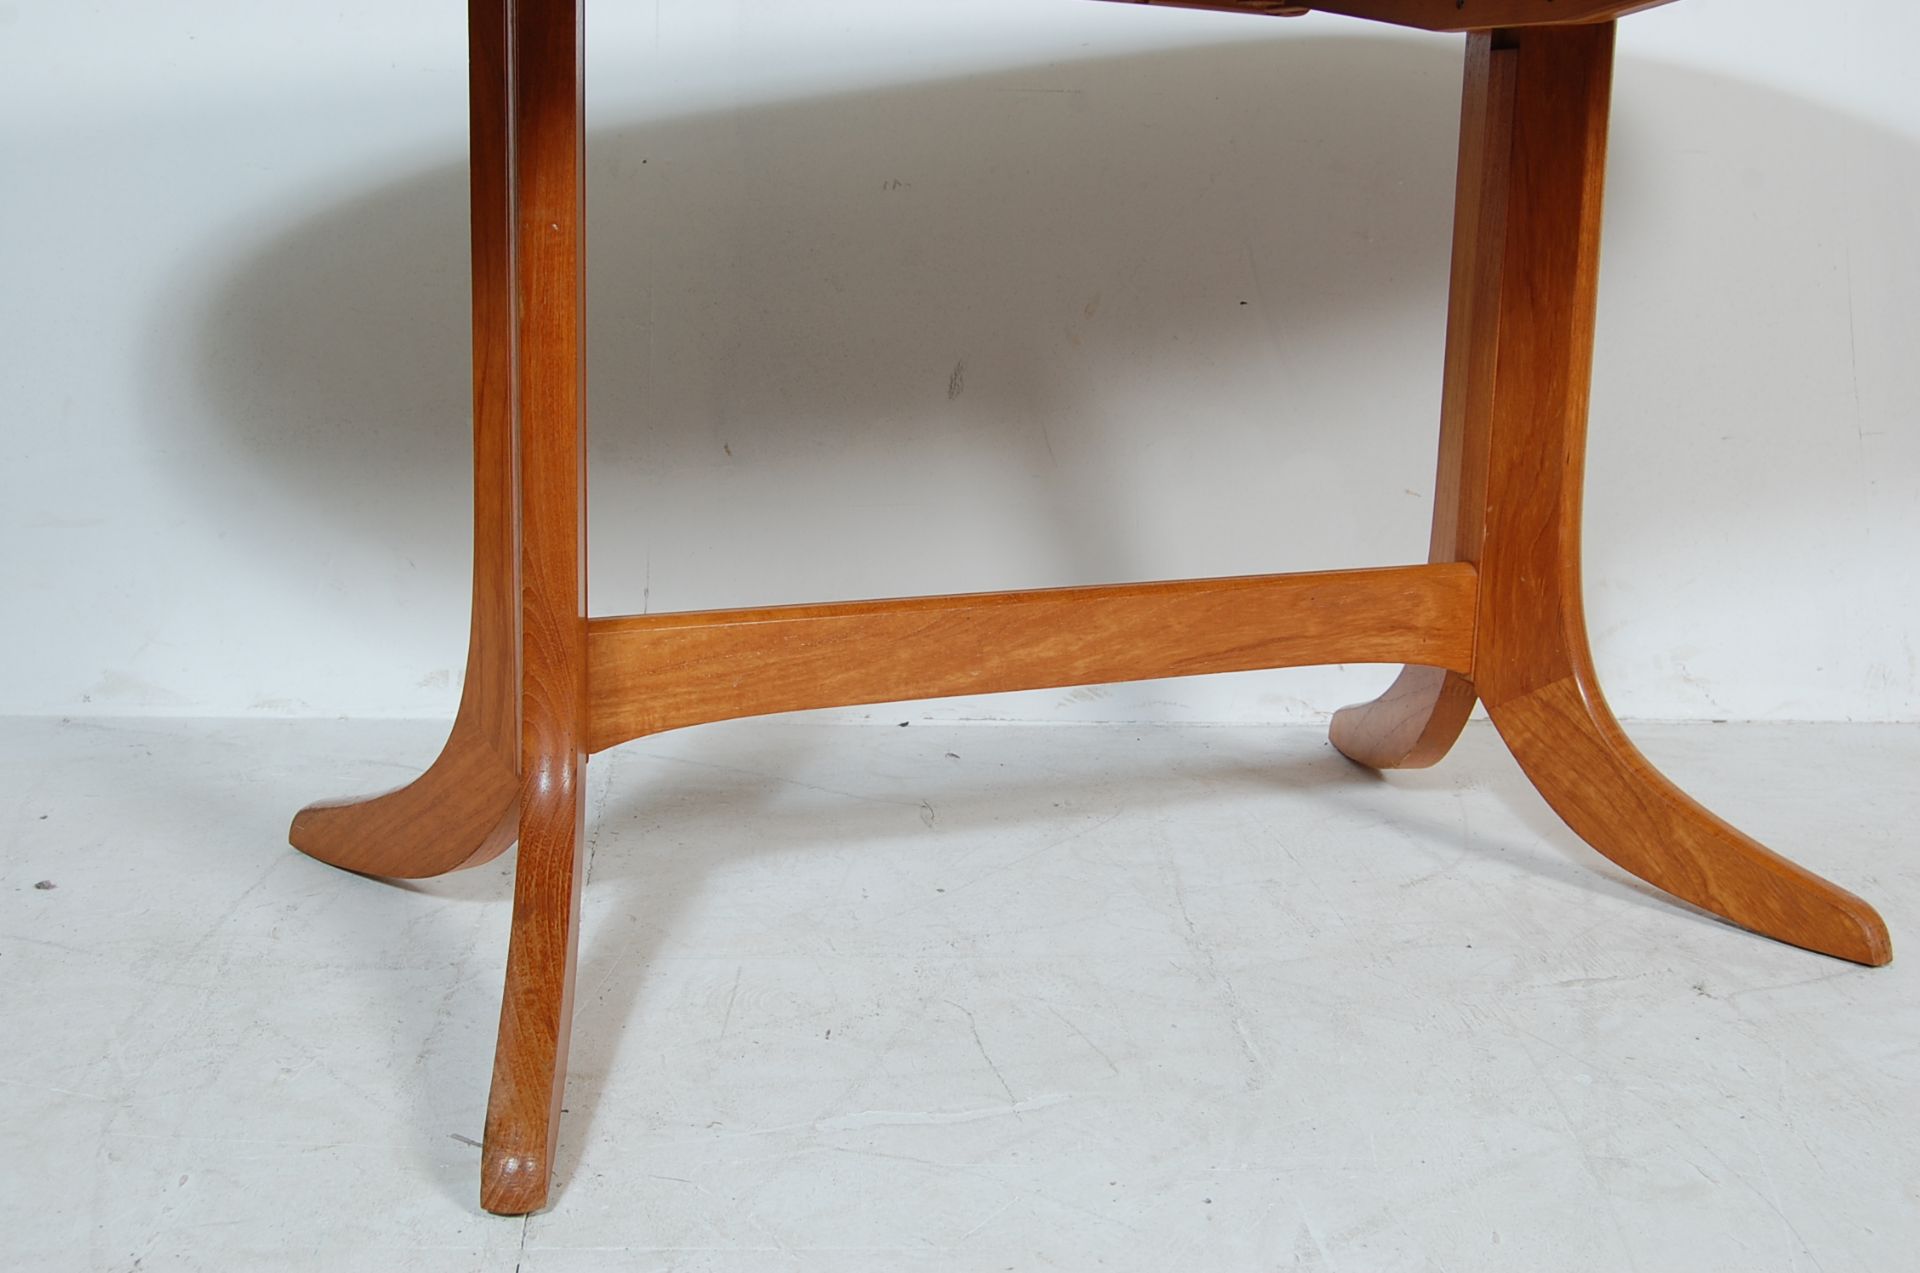 A VINTAGE 20TH CENTURY NATHAN TEAK WOOD OVAL DINING TABLE AND FOUR CHAIRS - Image 5 of 9